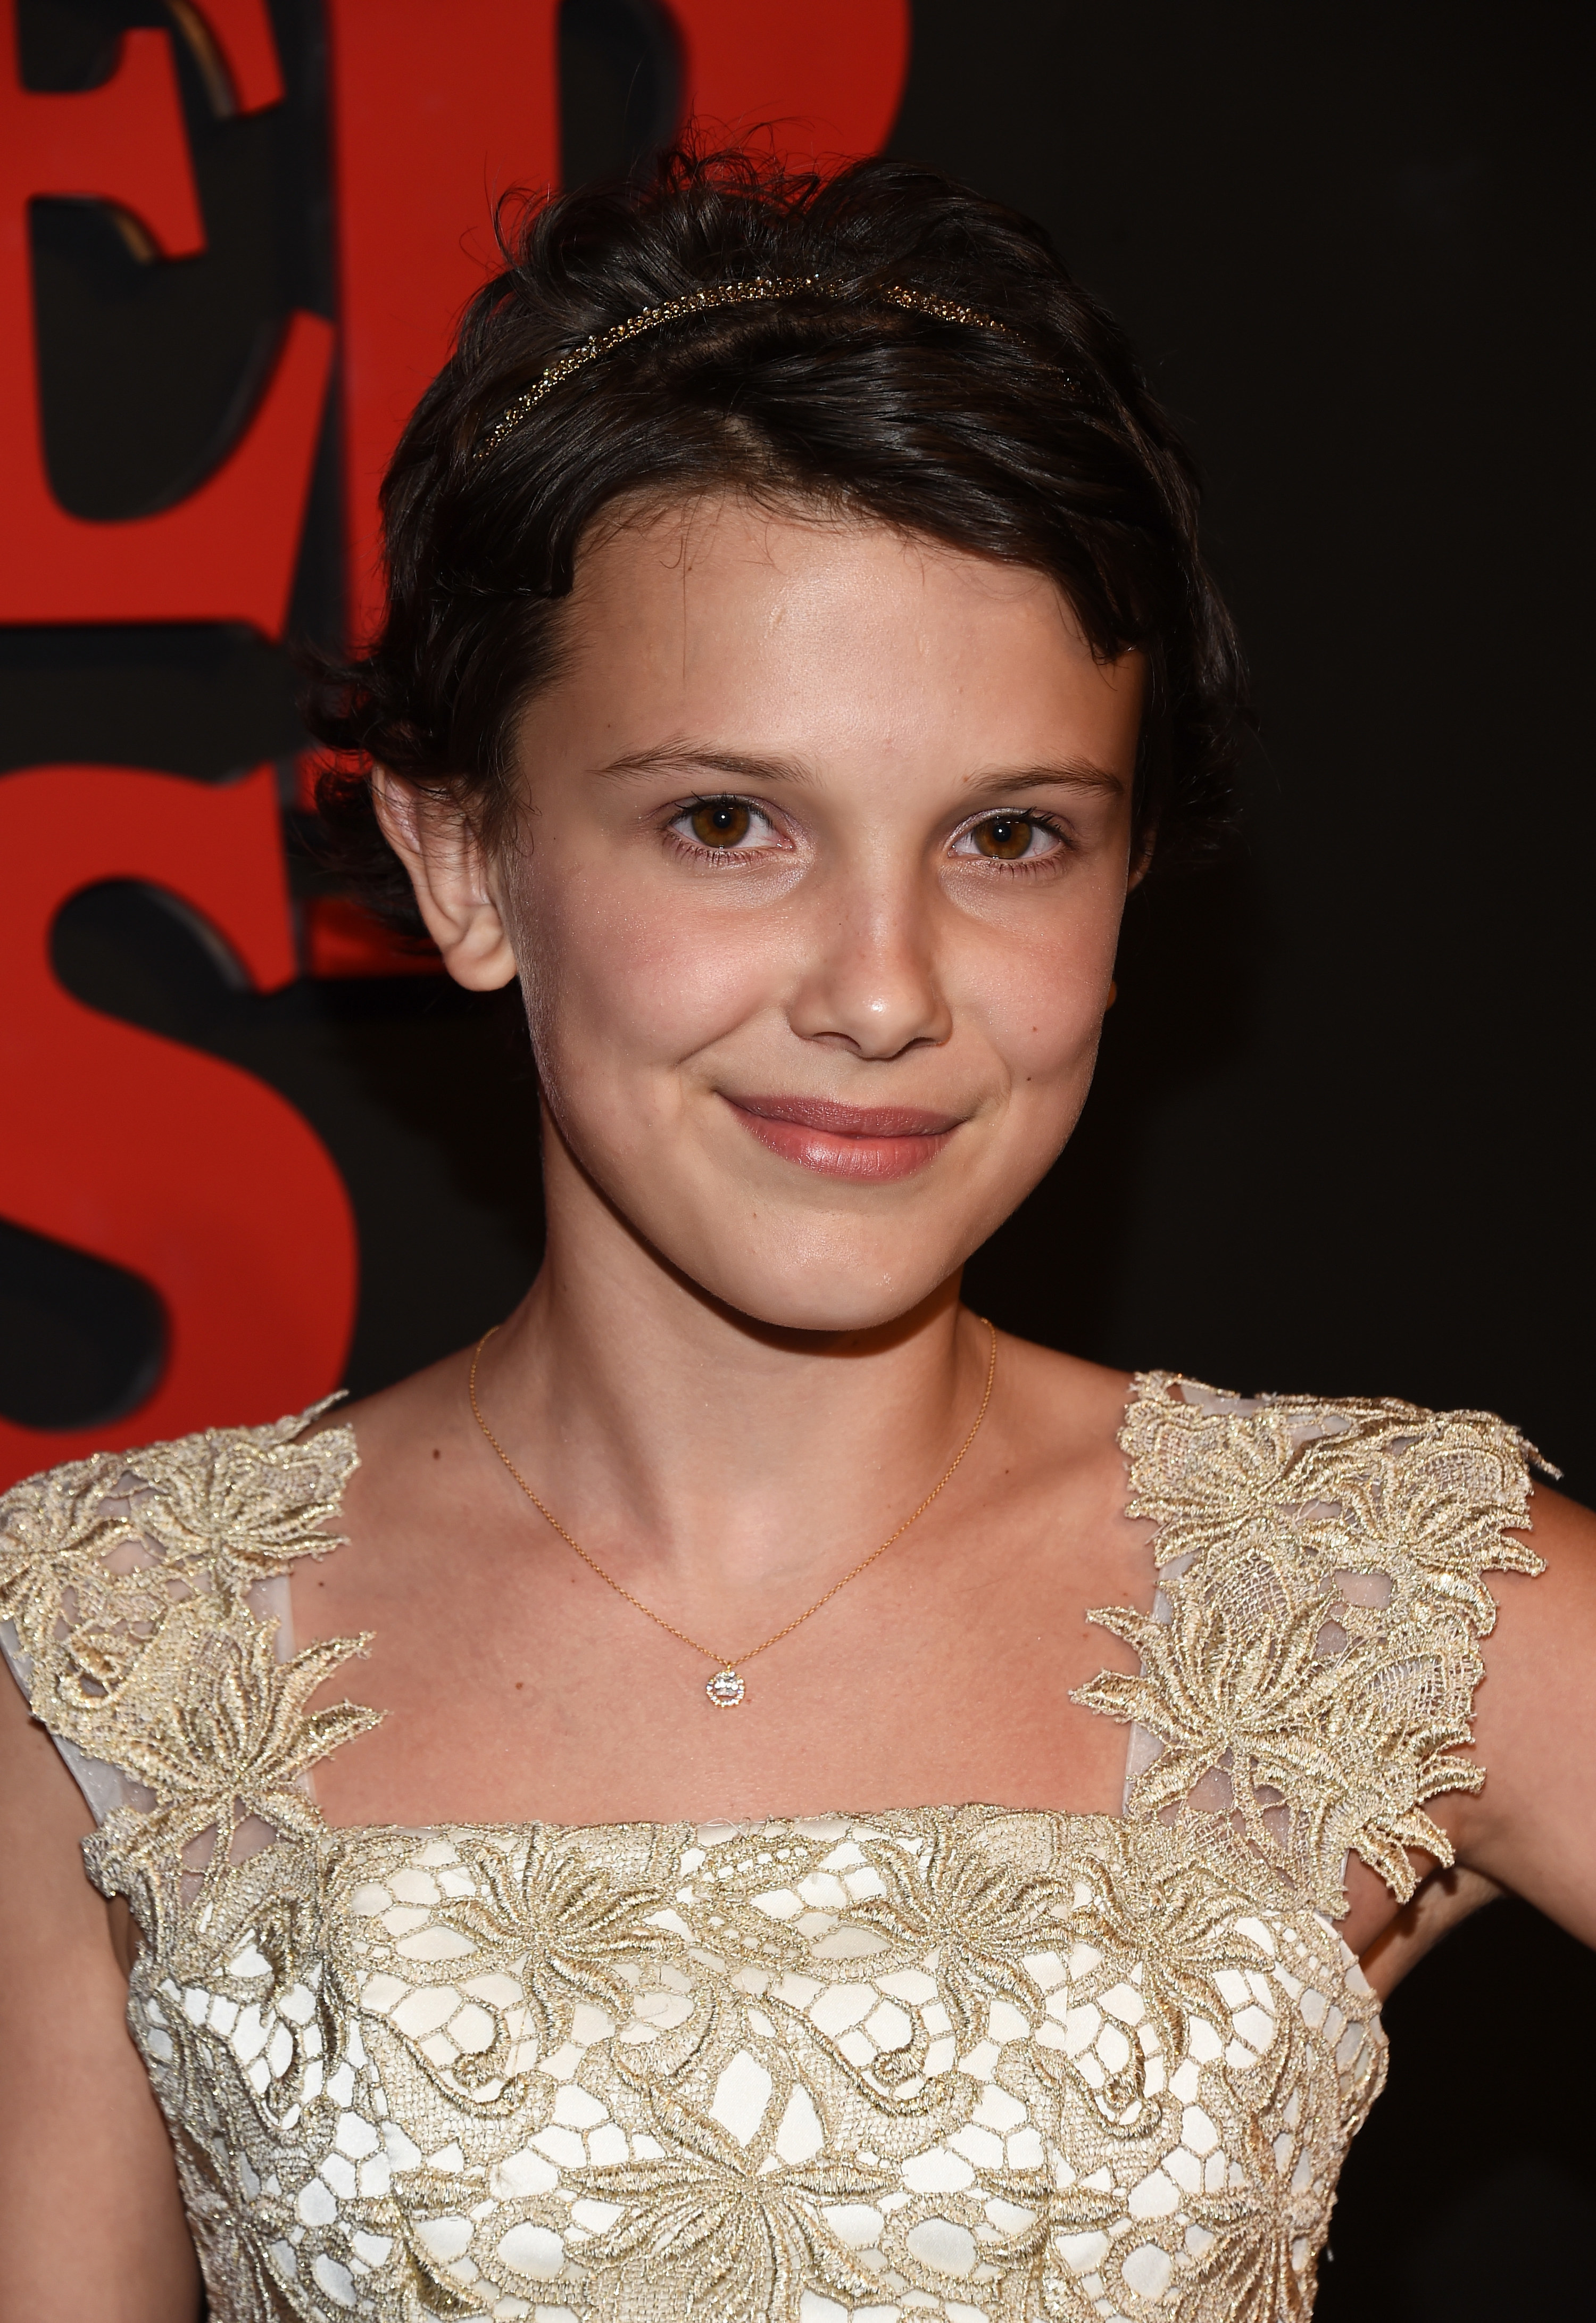 Why Millie Bobby Brown Stopped Using Social Media — Interview